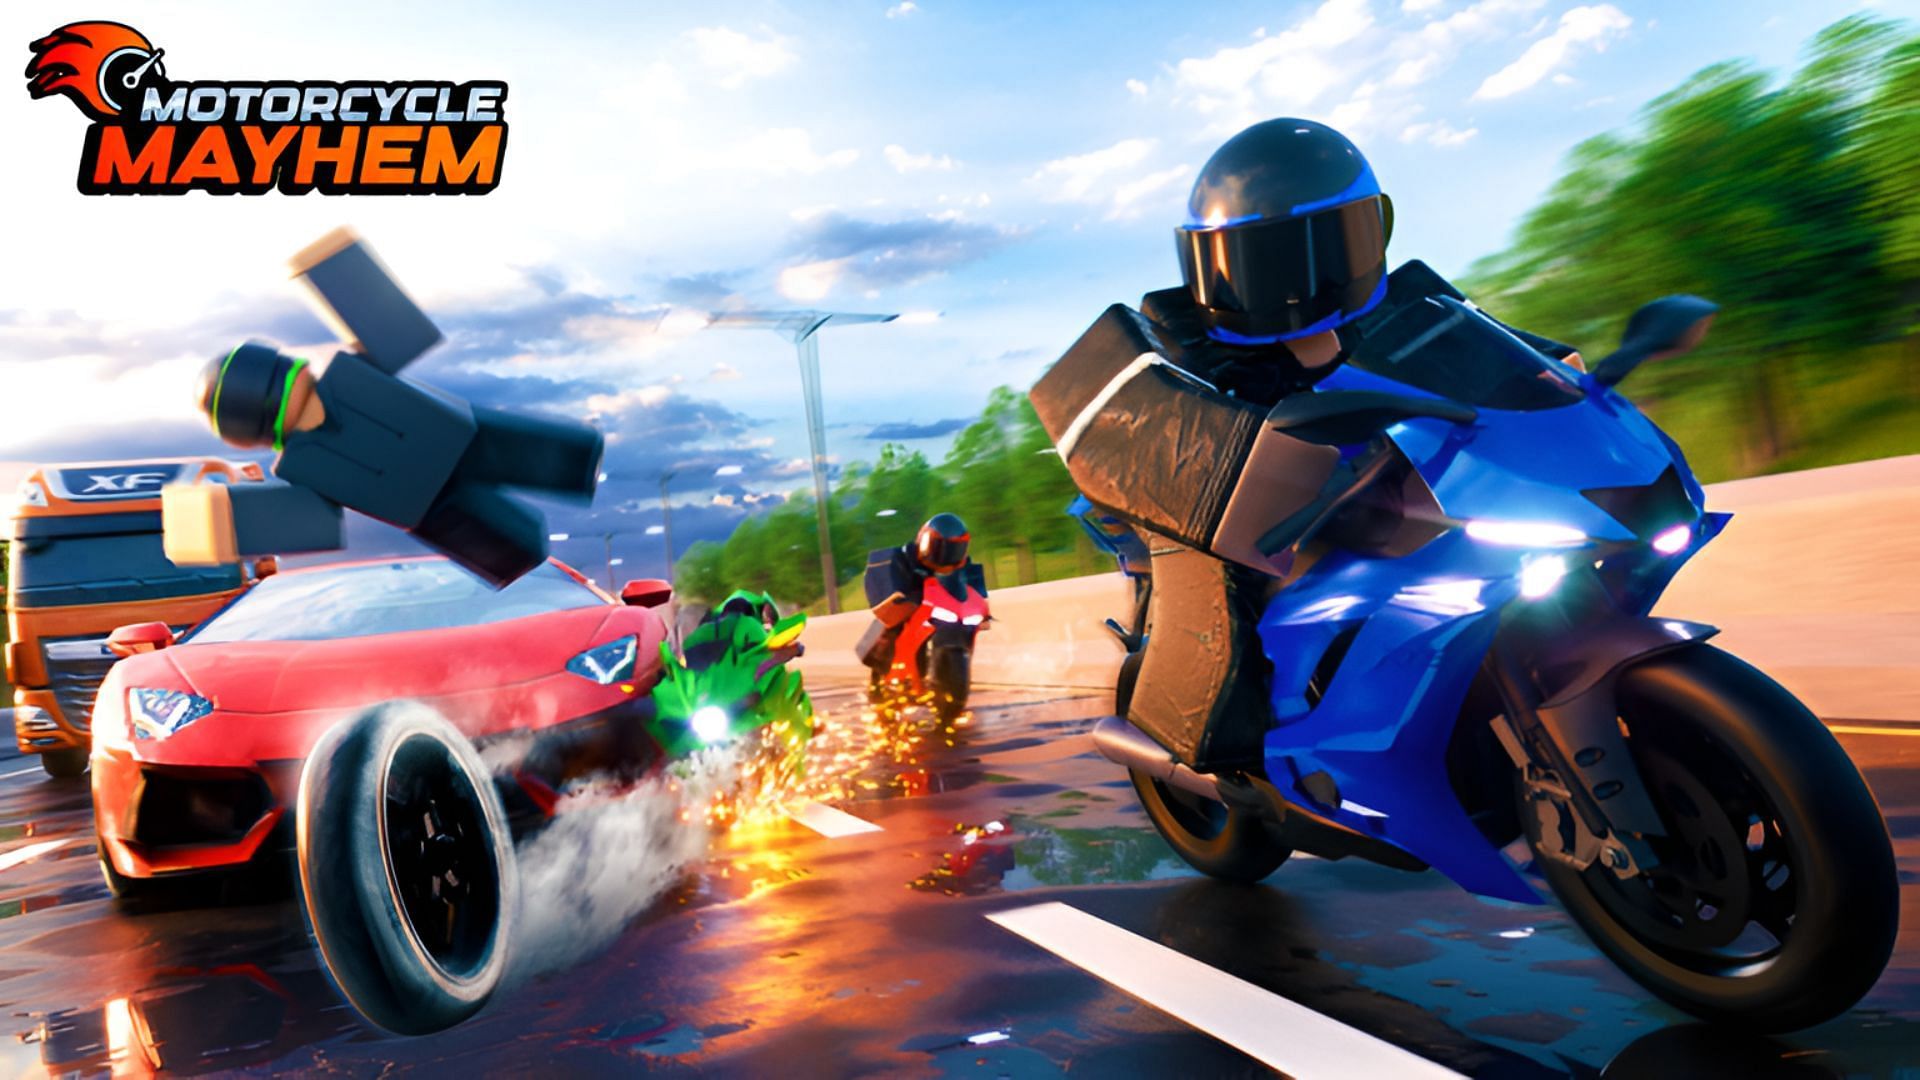 Gameplay cover for Motorcycle Mayhem (Image via Roblox)